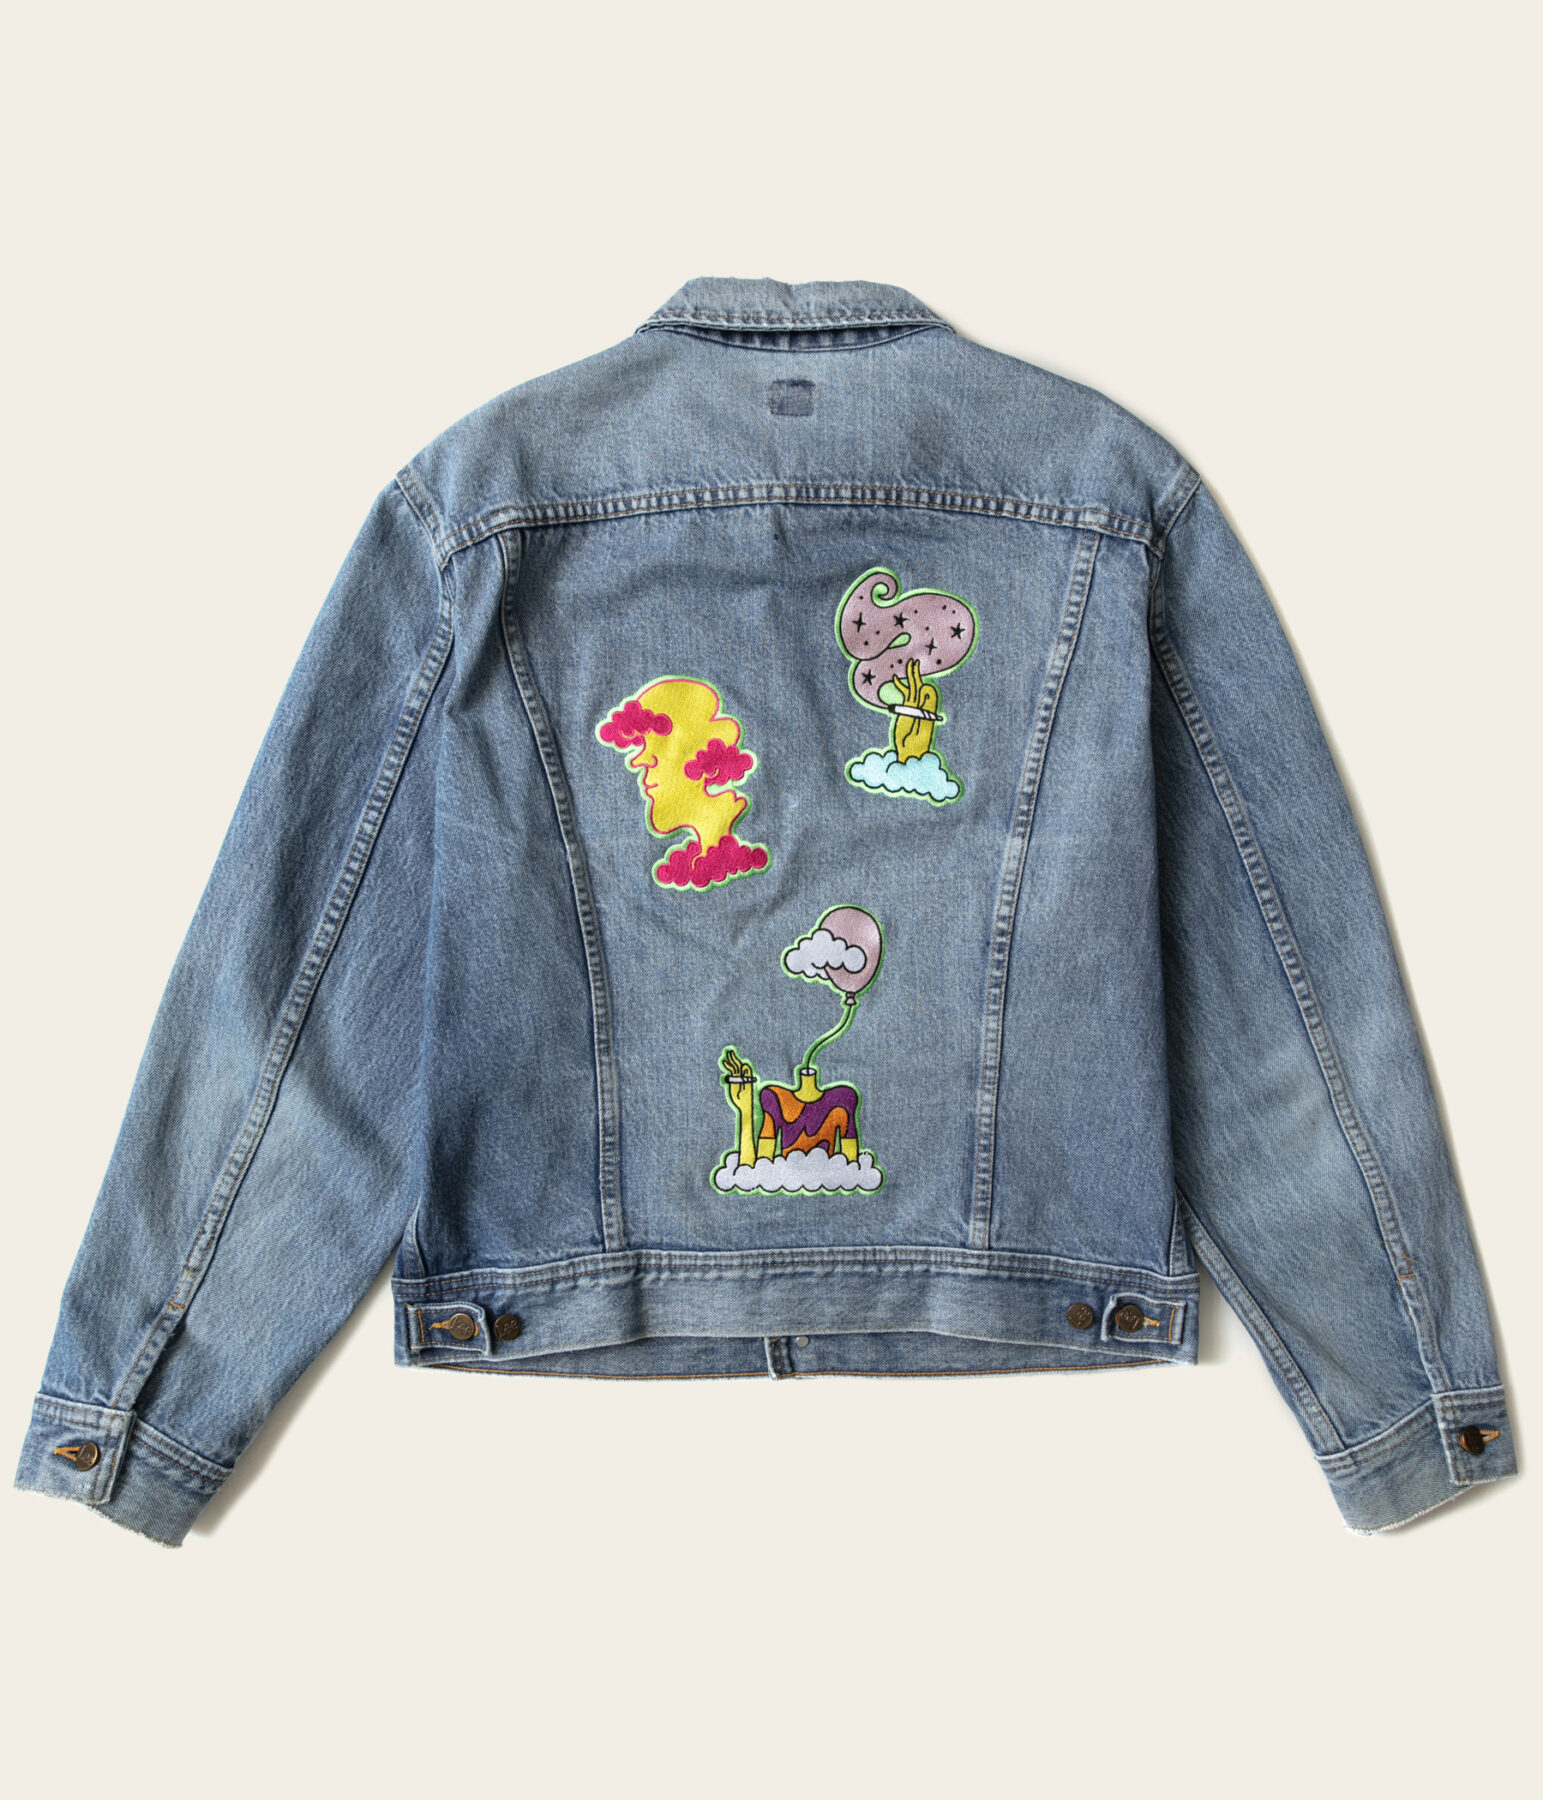 Jean Jacket with Flowerhood patches